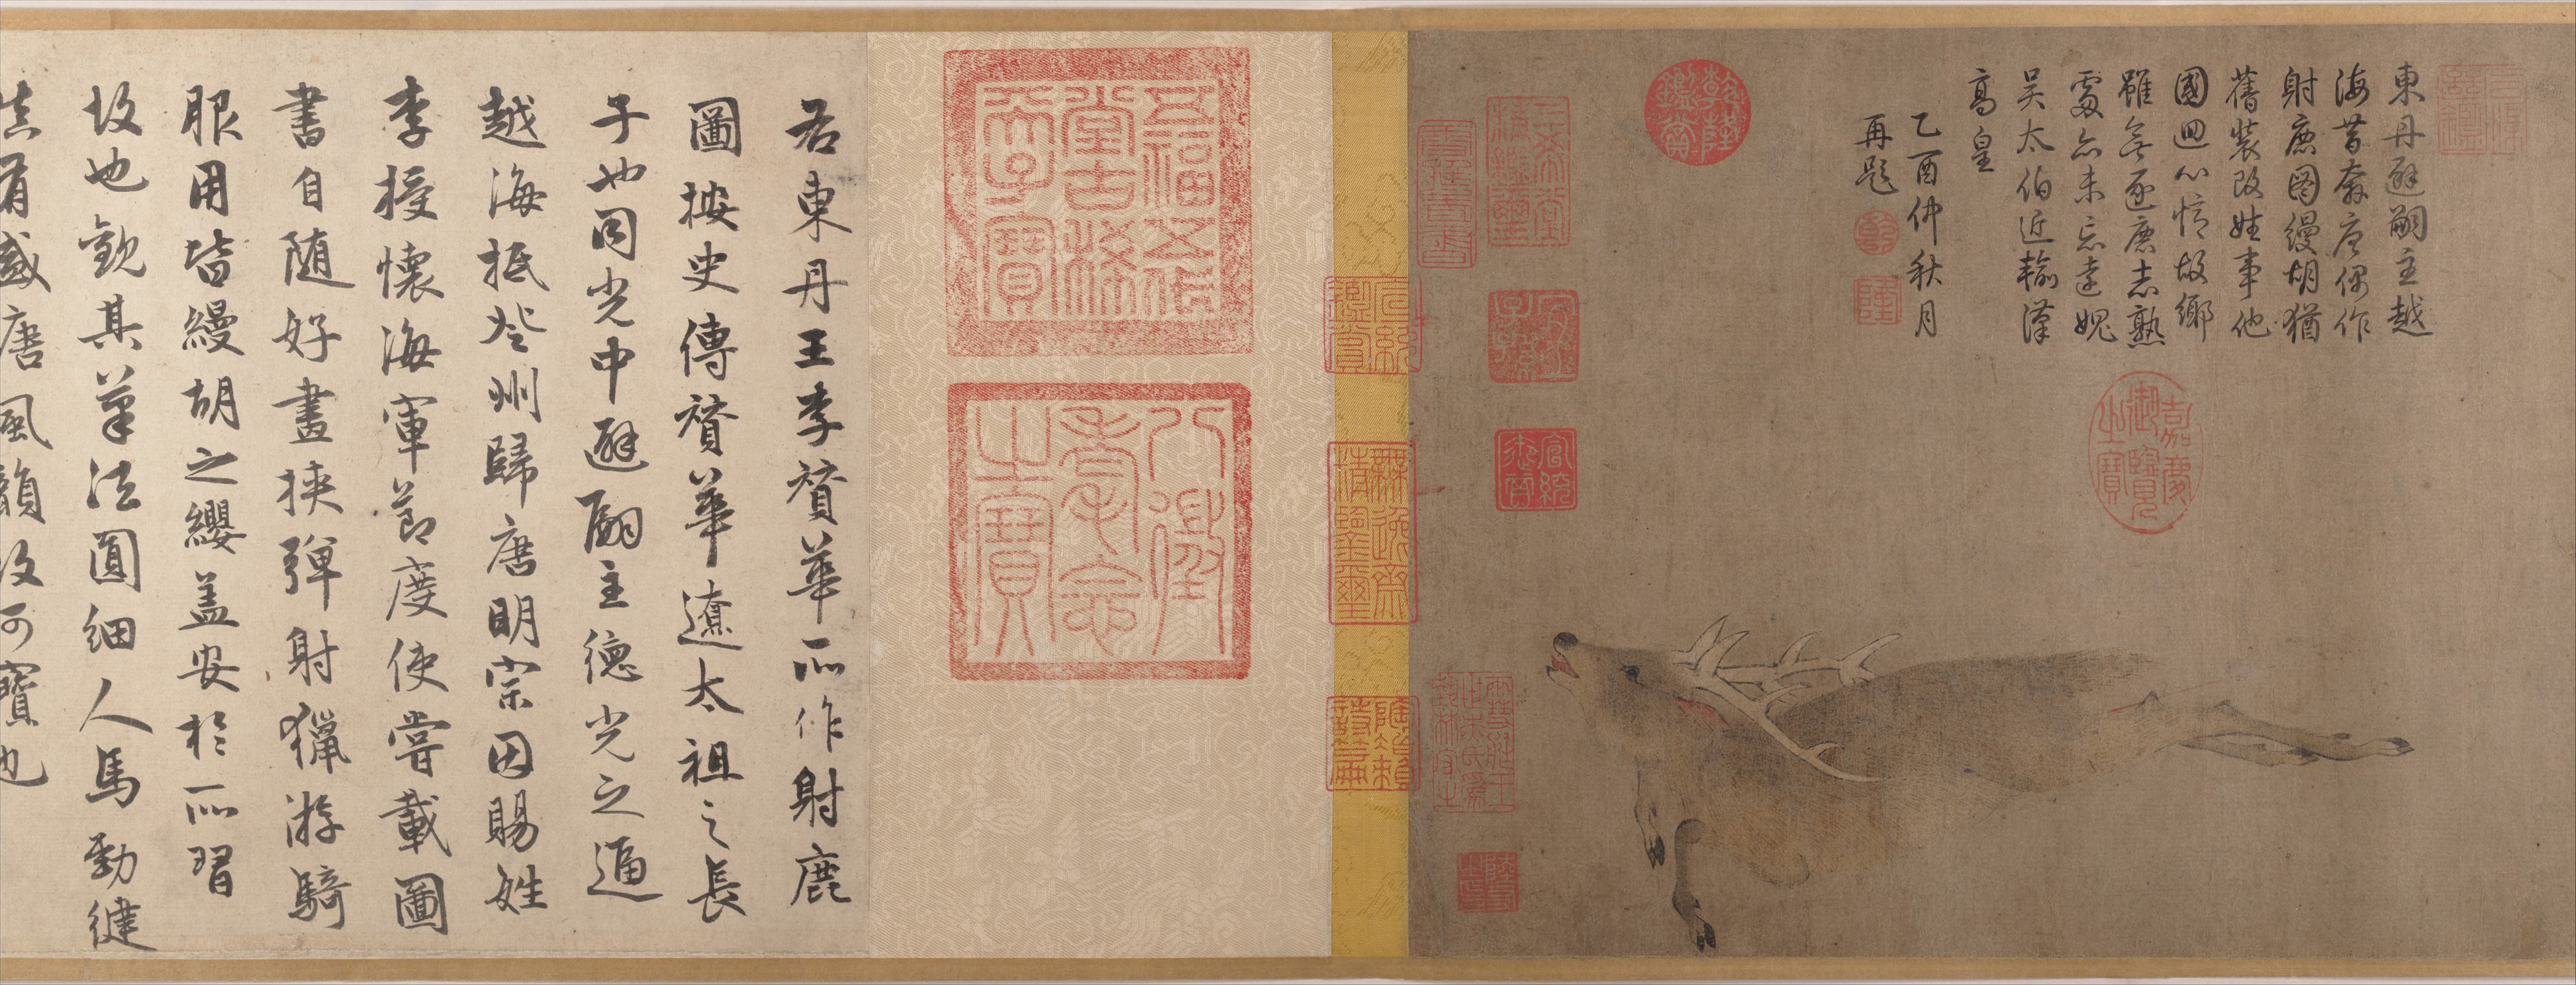 Attributed To Huang Zongdao Stag Hunt China Northern Song 960 1127 Or Jin 1115 1234 Dynasty The Metropolitan Museum Of Art